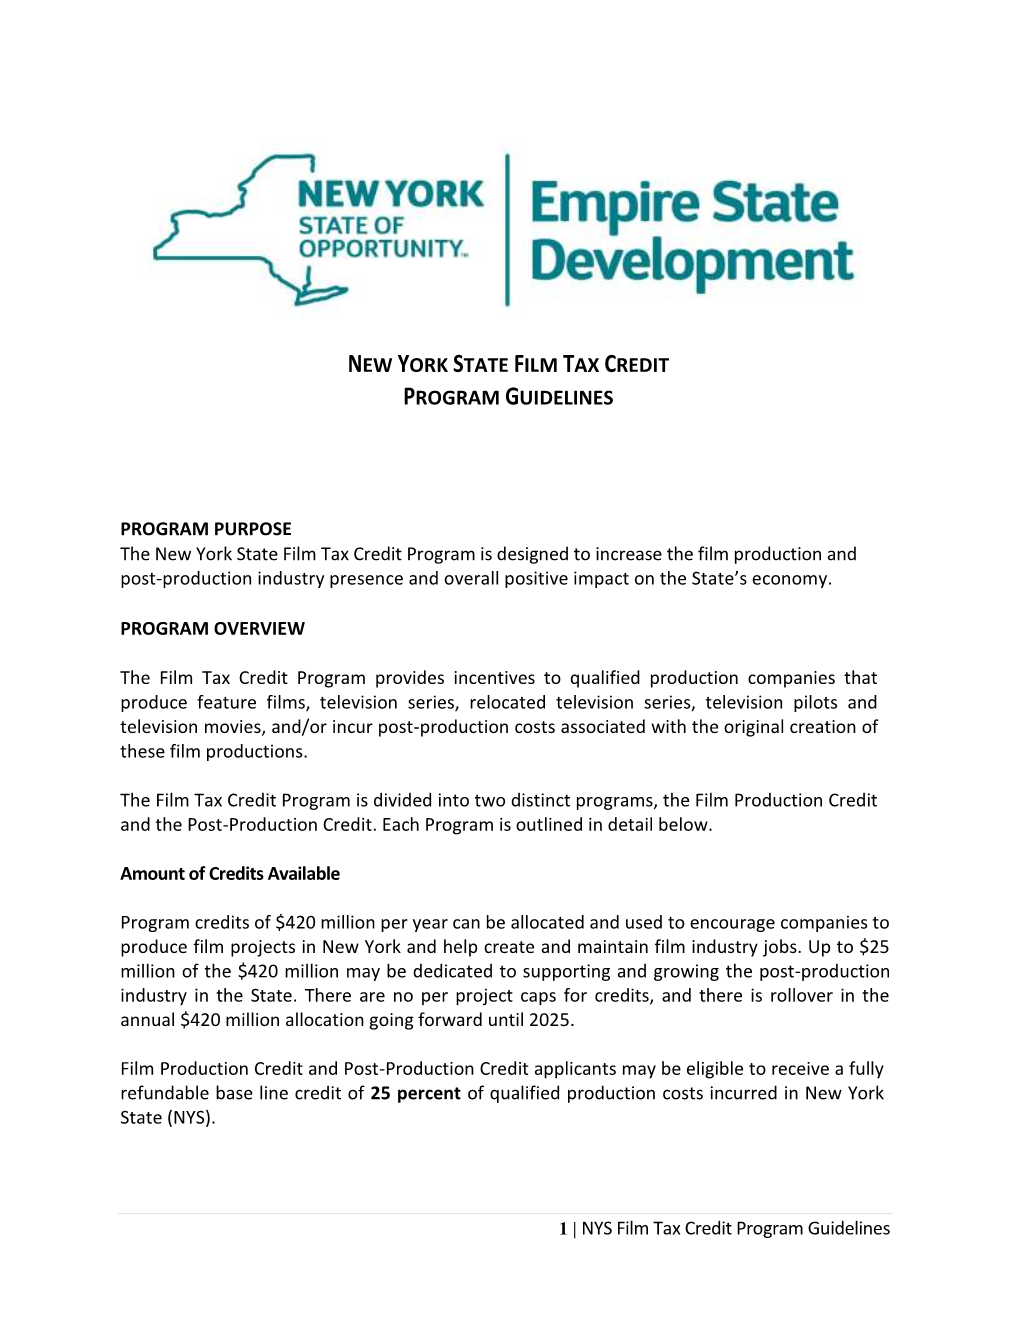 New York State Film Tax Credit Program Guidelines